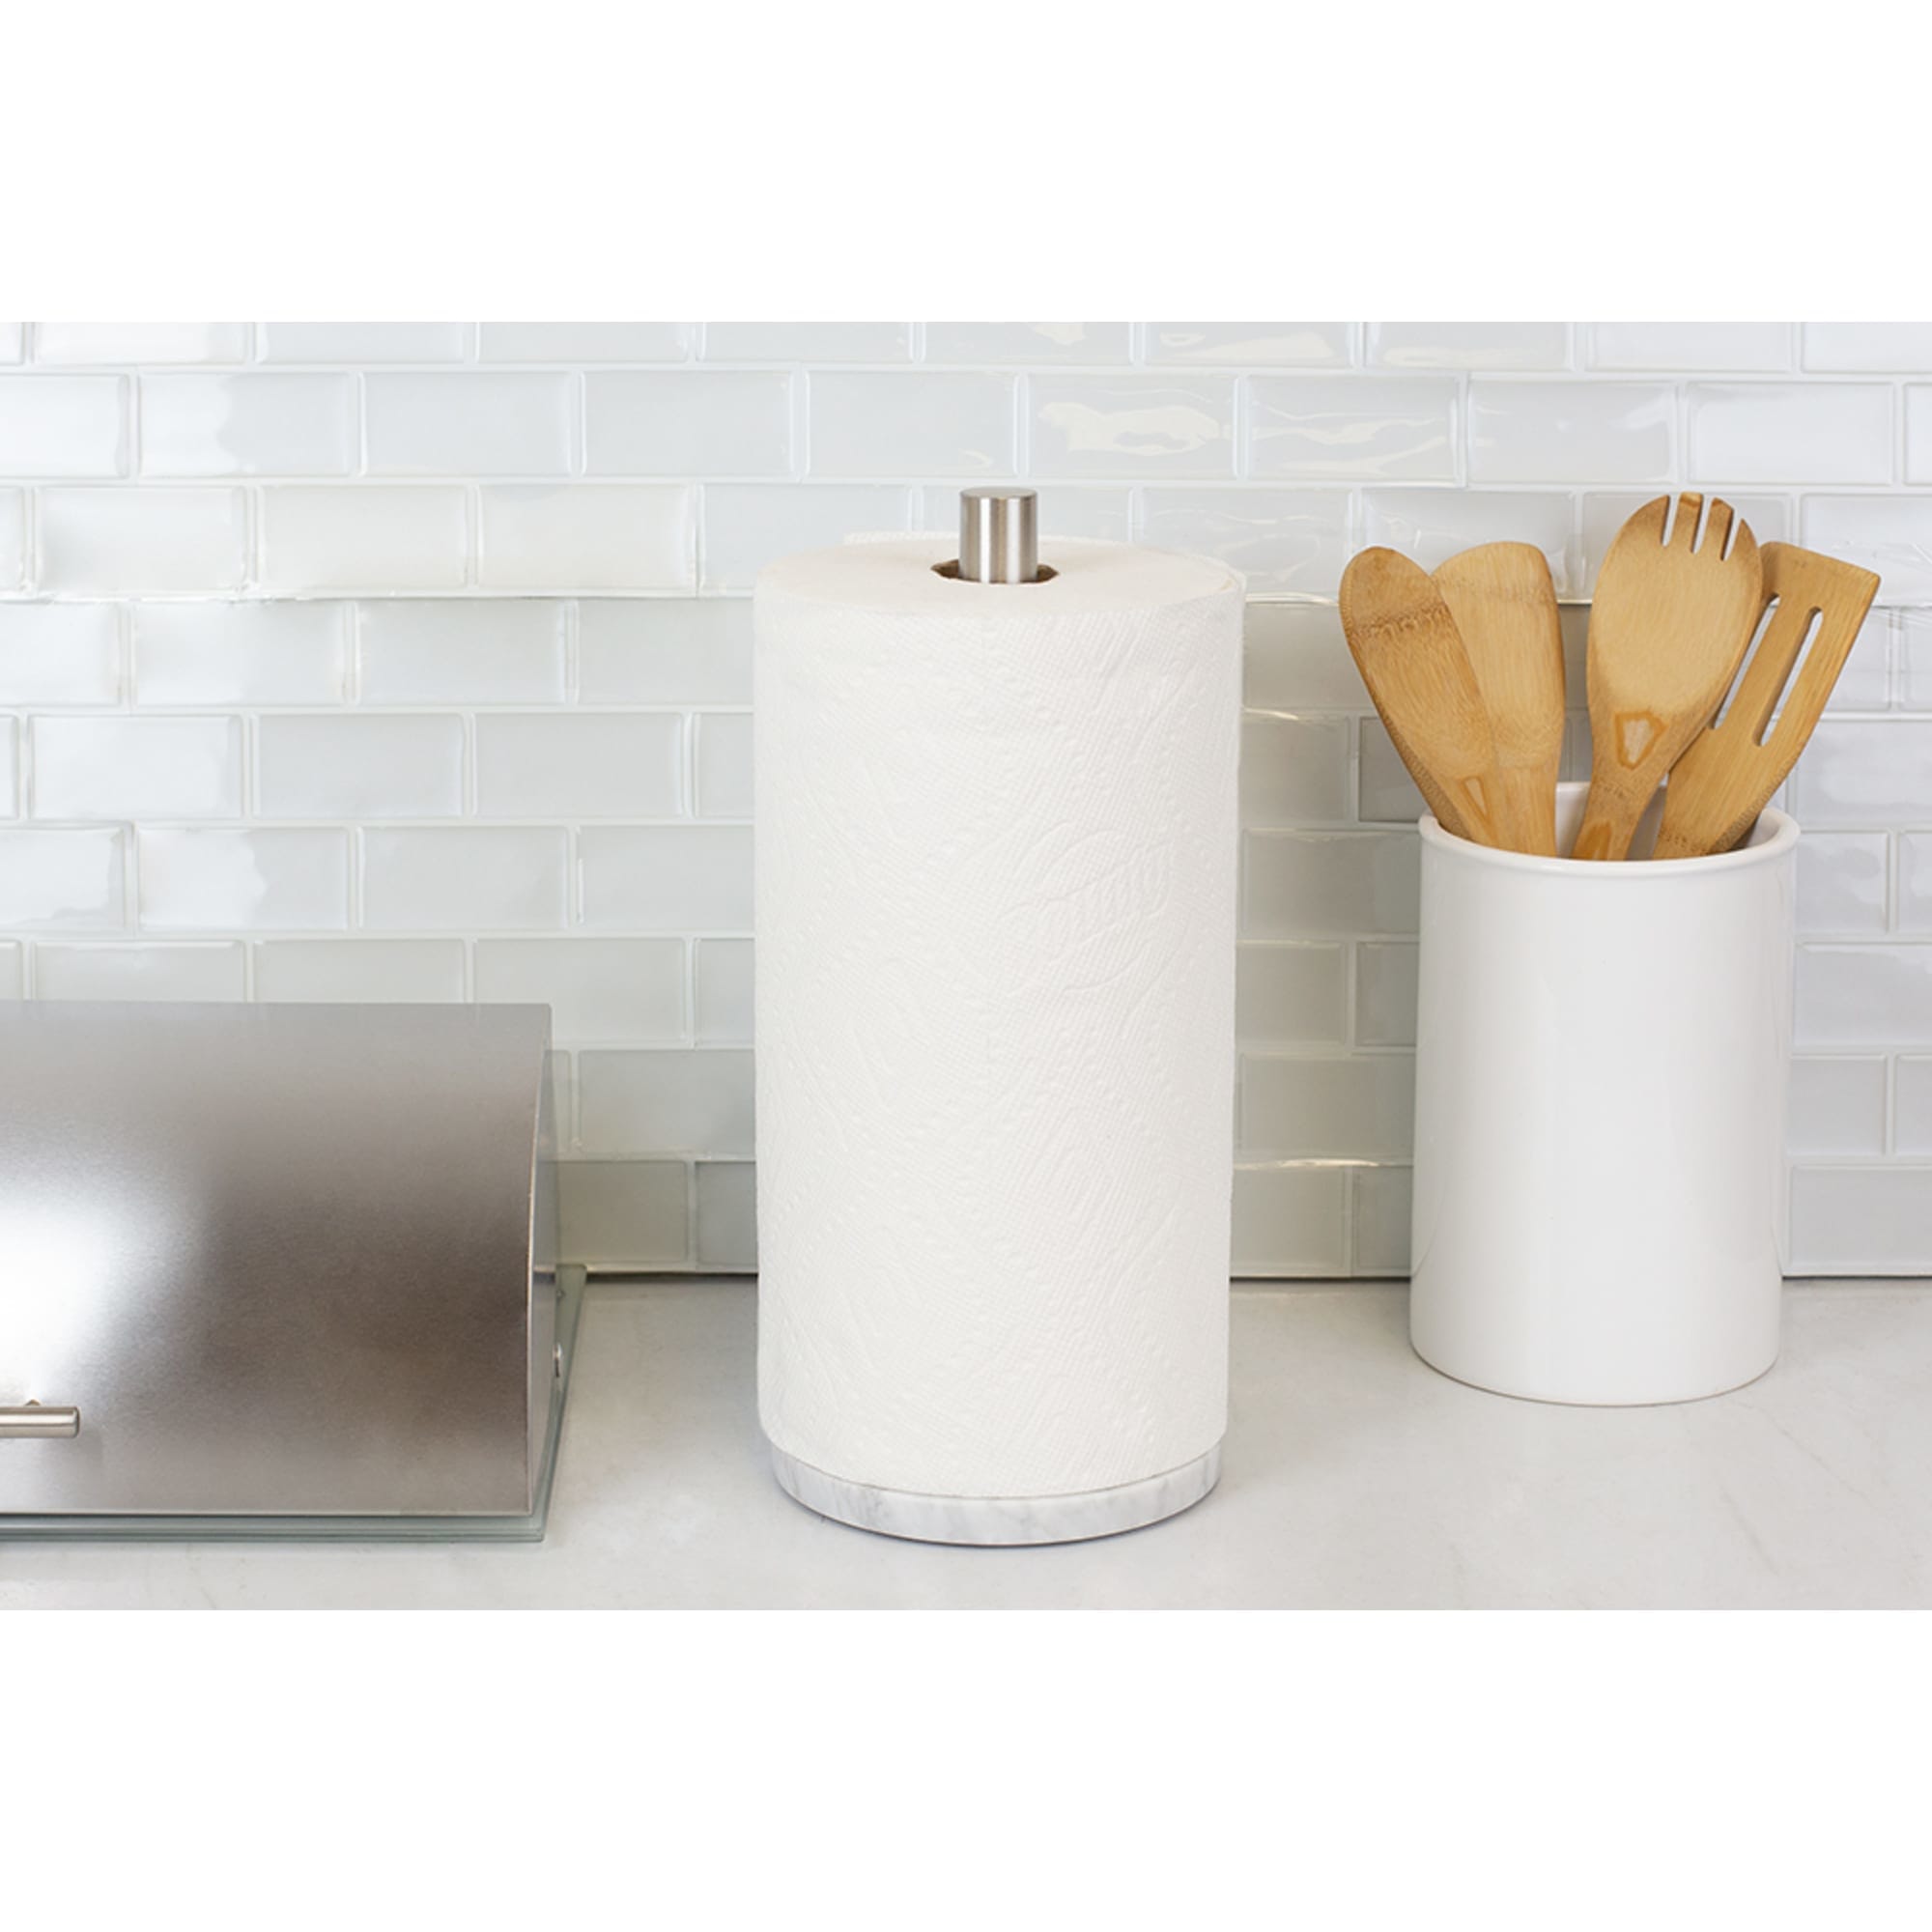 Home Basics Stainless Steel Paper Towel Holder with Marble Base $10.00 EACH, CASE PACK OF 6